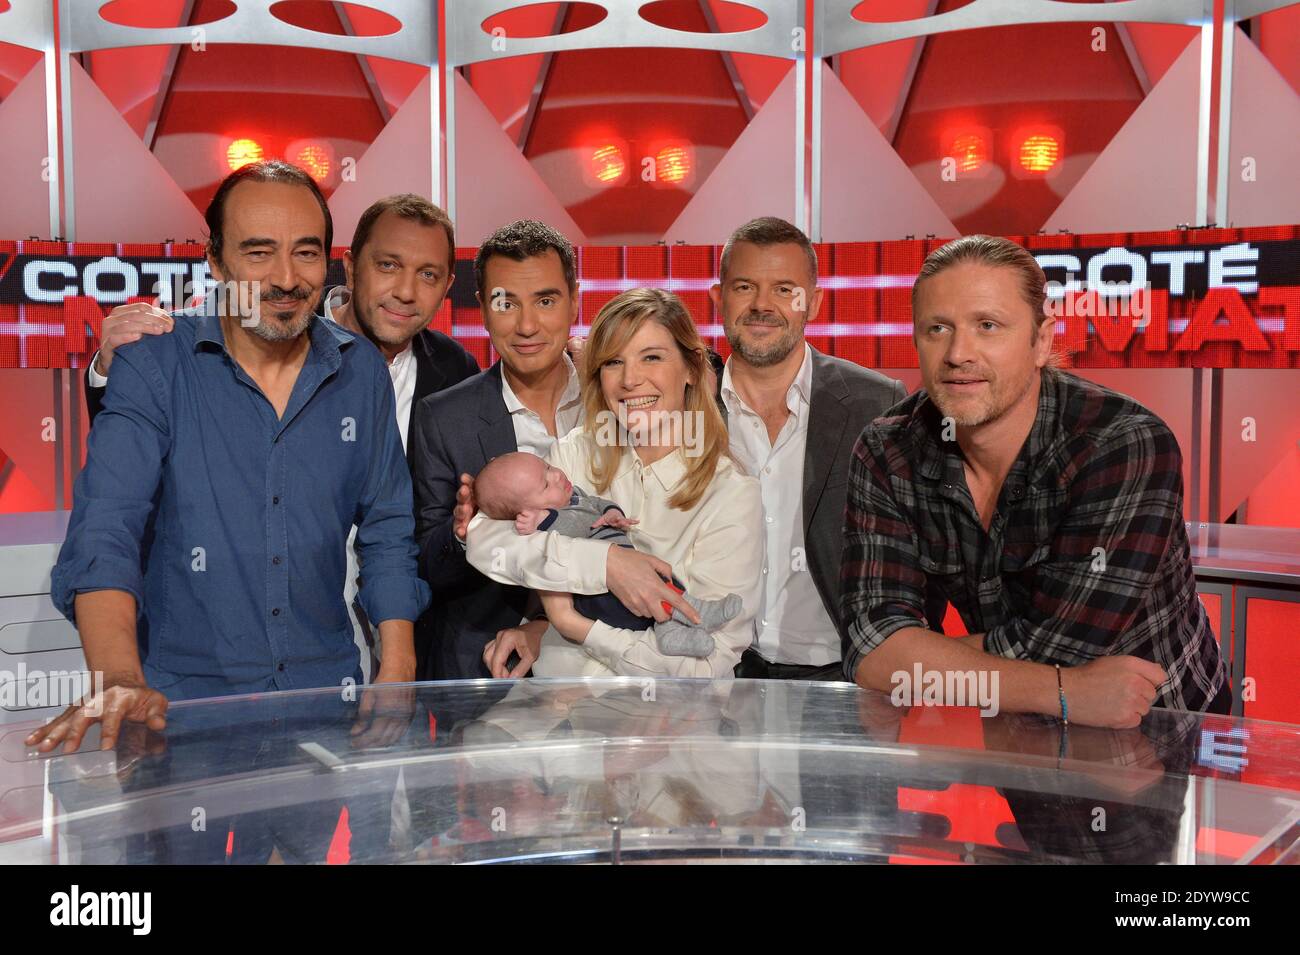 Xavier Gravelaine, Emmanuel Petit, Didier Roustan, Éric Naulleau, Louise  Ekland and son Sacha and Laurent Luyat at the taping of 'Cote Match' on  September 27, 2013 in Paris, France. Photo by Max